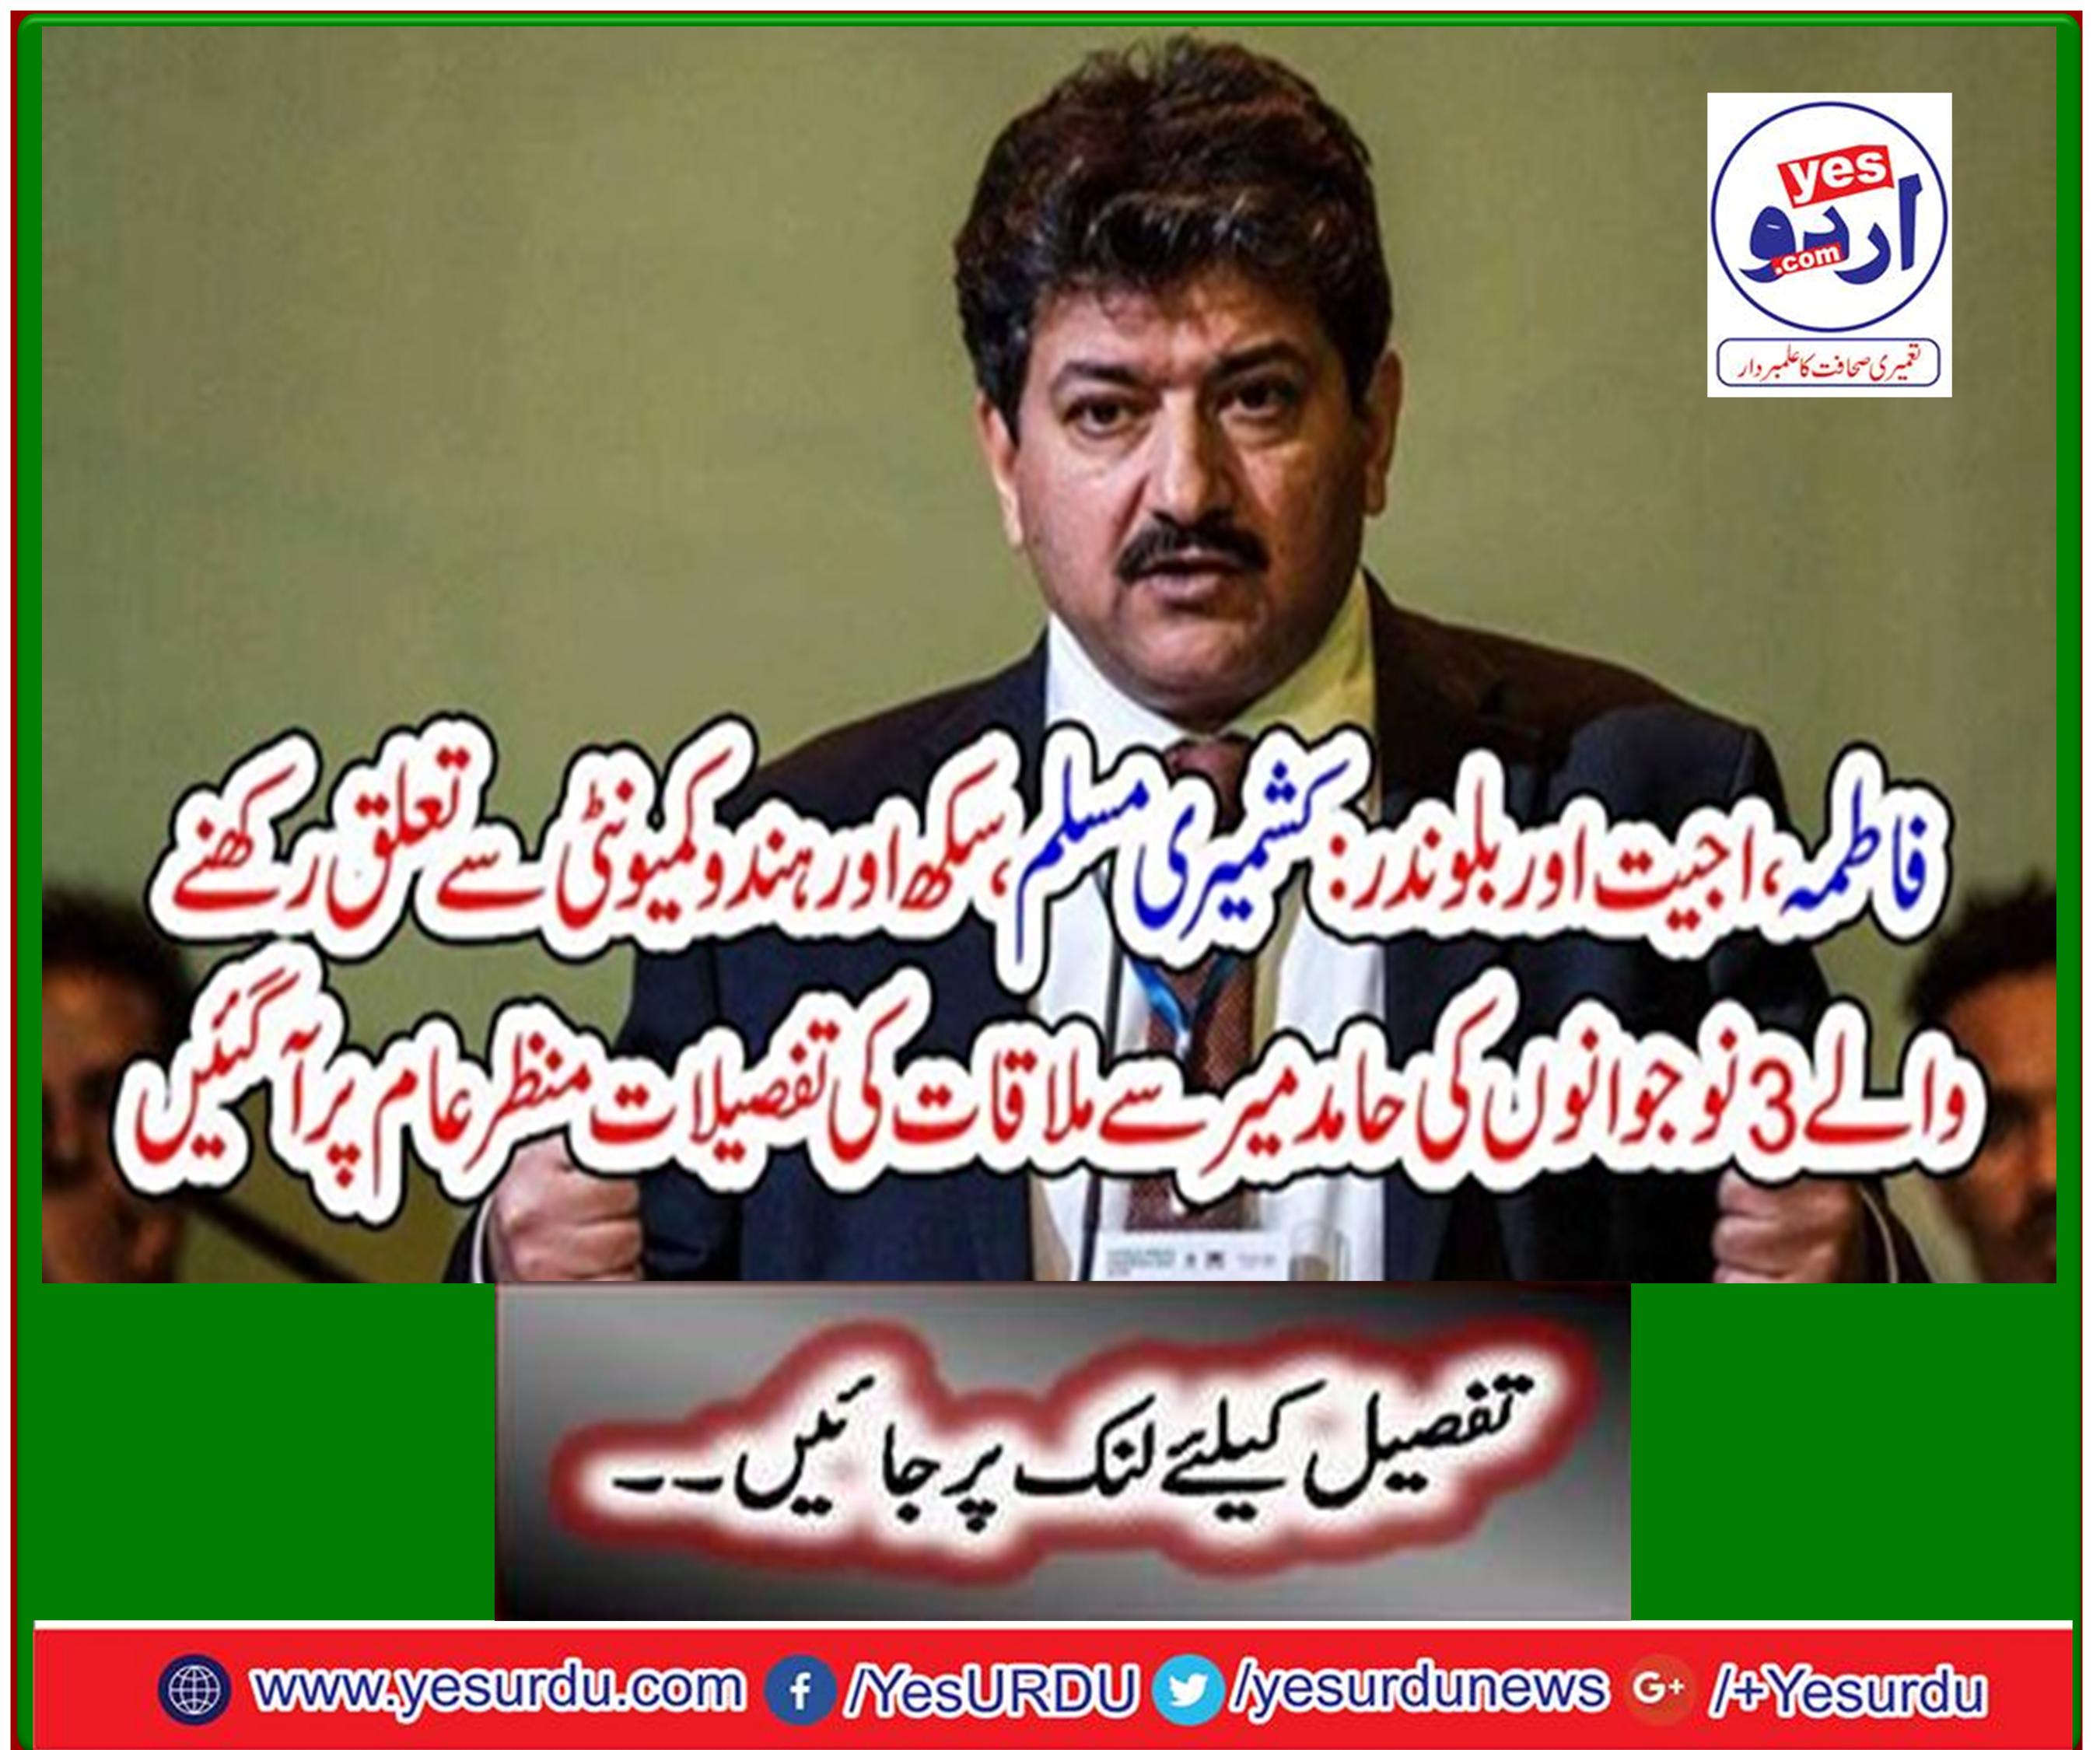 Fatima, Ajit and Balwinder: Details of 3 youths from Kashmiri Muslim, Sikh and Hindu community meeting with Hamid Mir